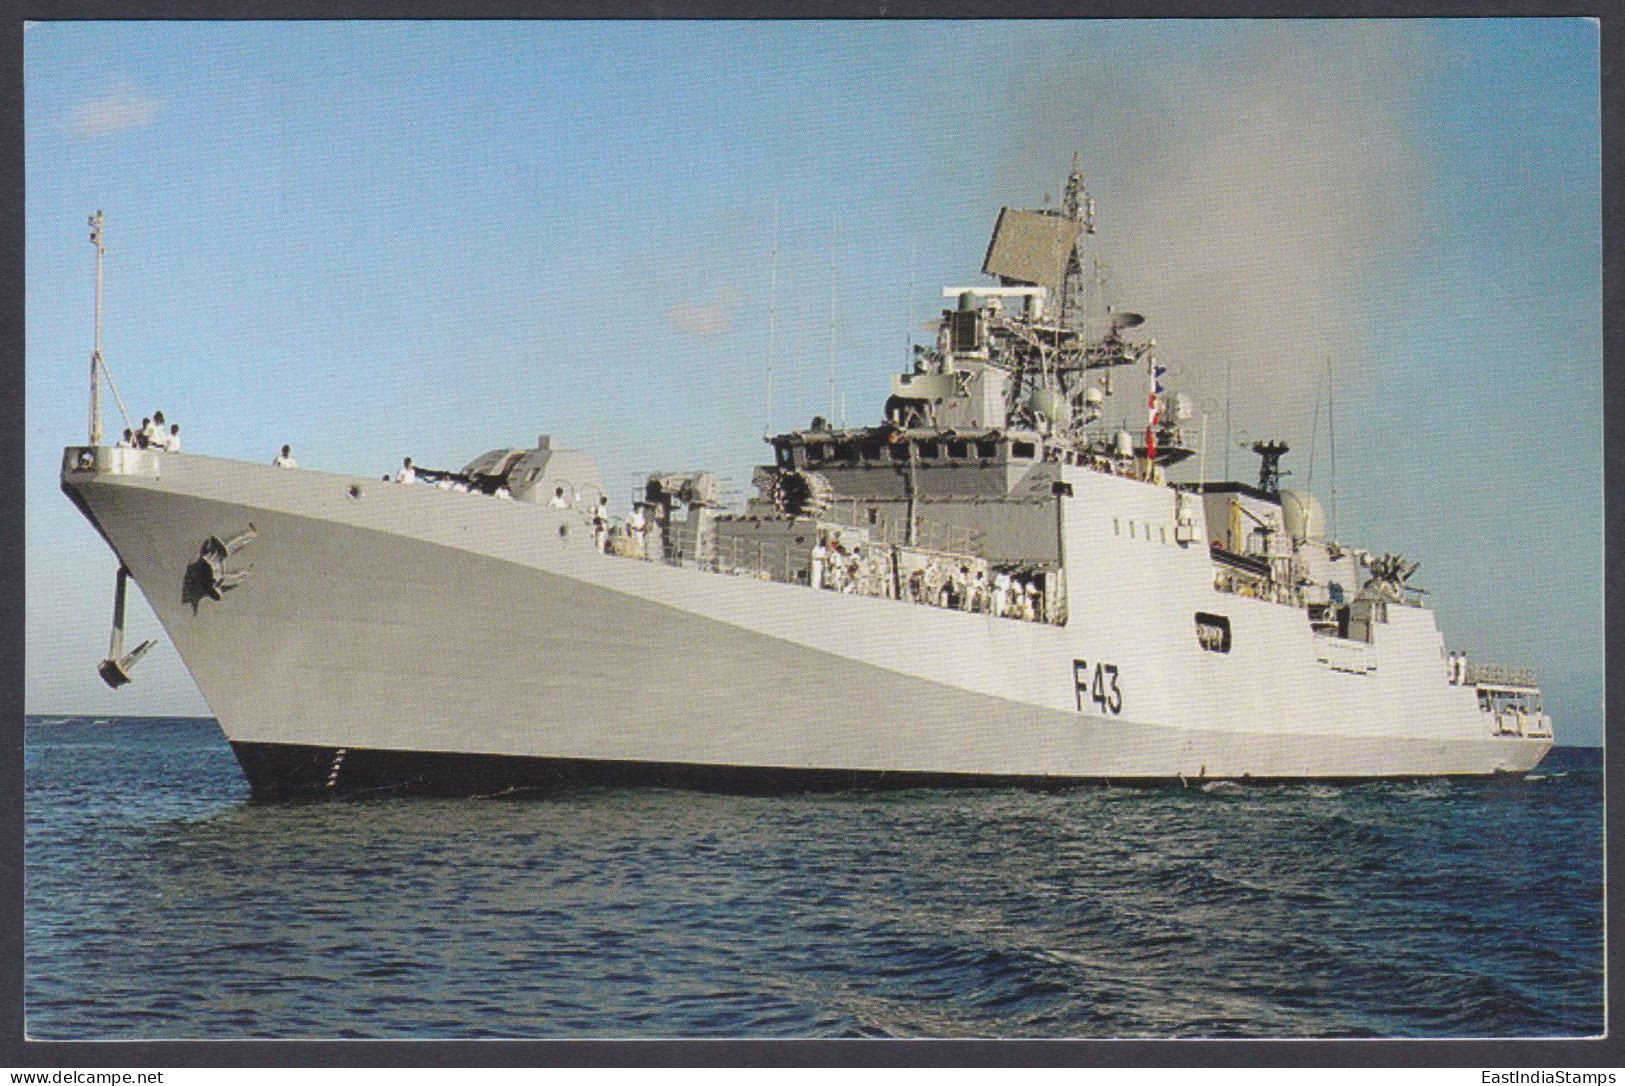 Inde India Mint Unused Postcard Frigate Indian Navy, Naval Ship, Warship, Ships, Military, Militaria - India